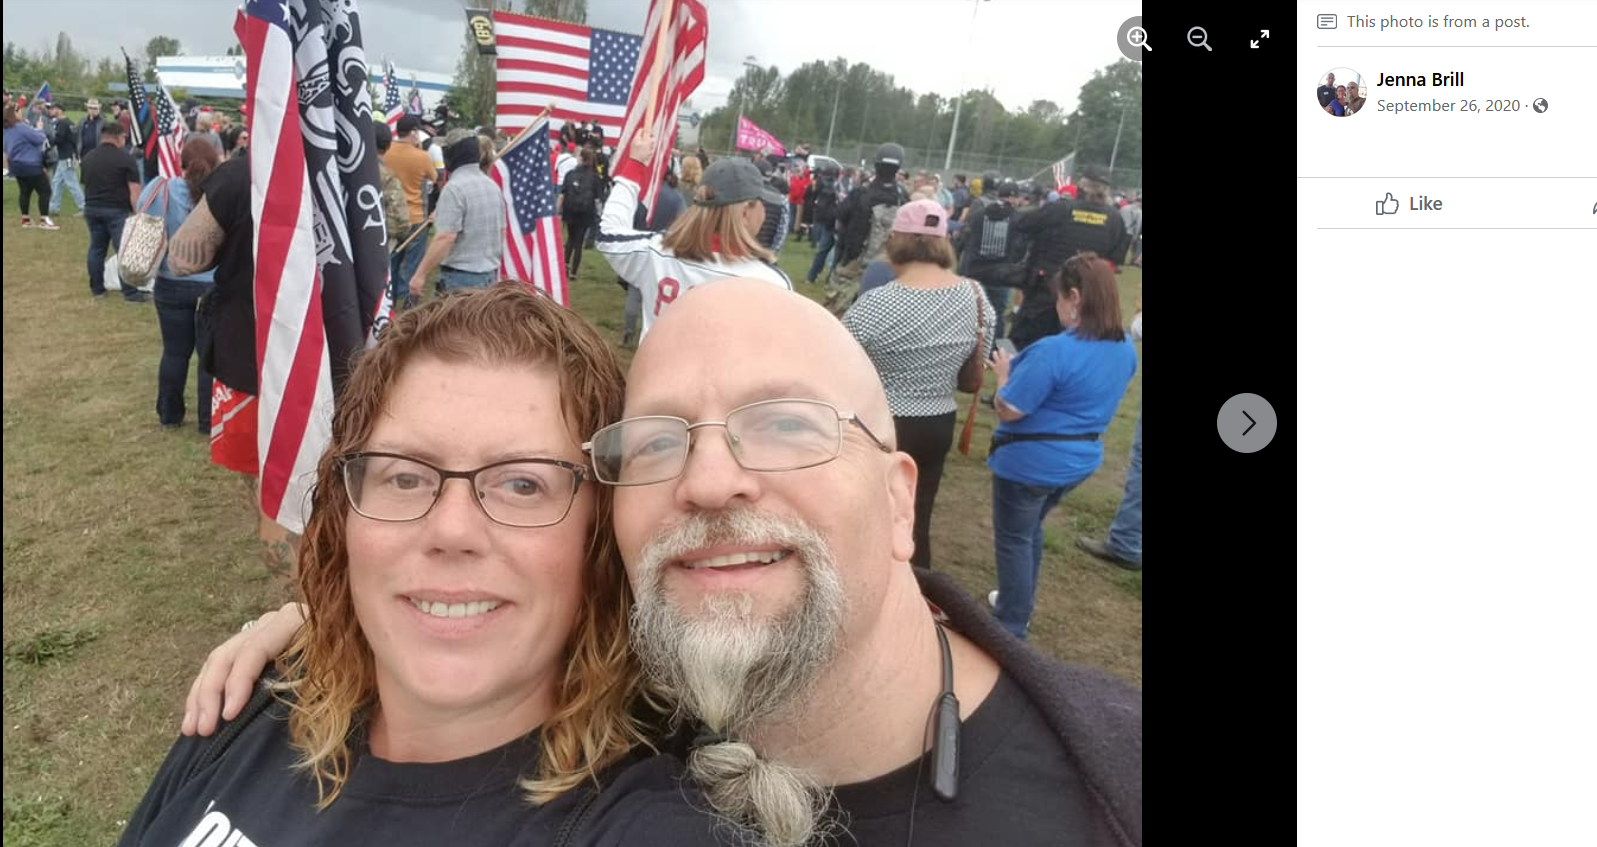 Picture posted on Jenna Brill's Facebook account of herself with Chuck Reynolds at the September 26, 2020 Proud Boys event at Delta Park.